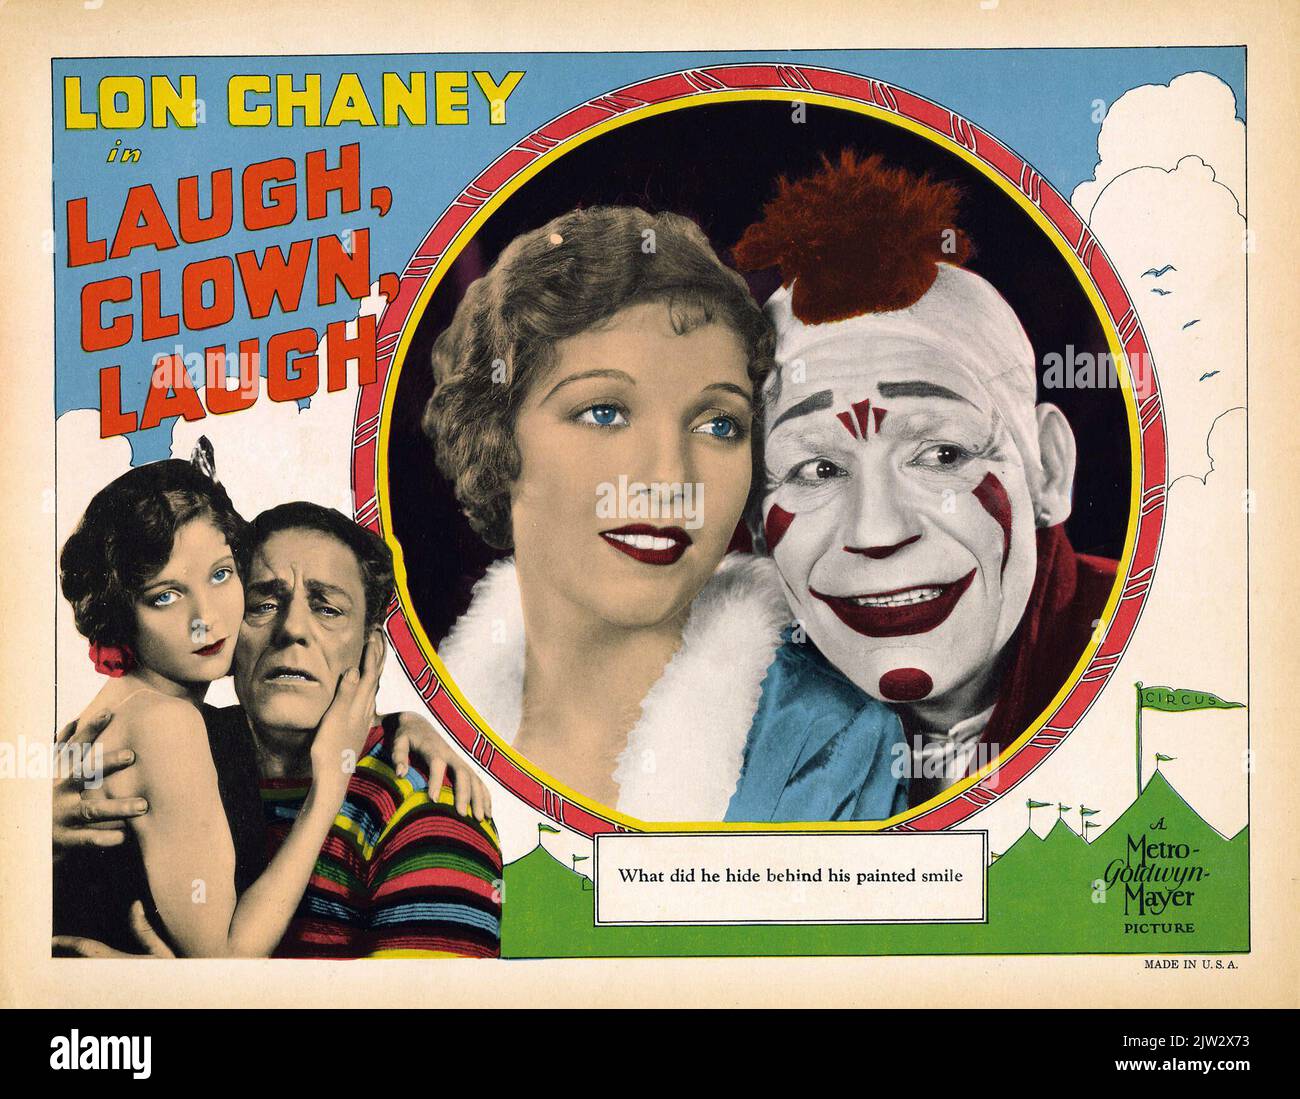 Lon Chaney - Lobby card for the American drama film Laugh, Clown, Laugh (1928) Stock Photo